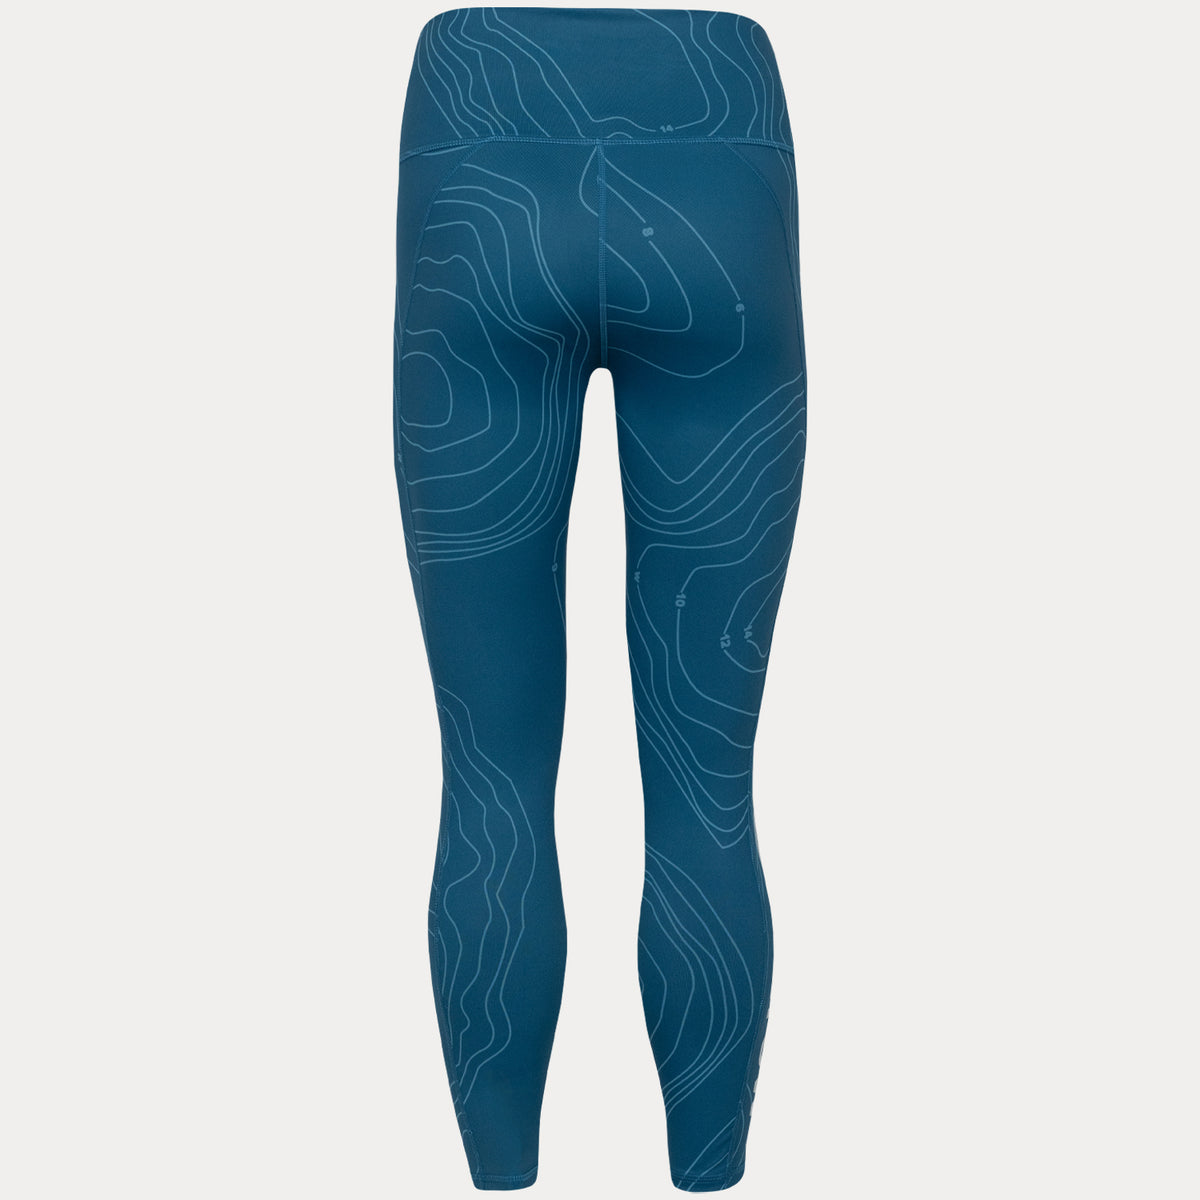 back view of dark blue high waisted 7/8 legging with light blue bathymetic line pattern